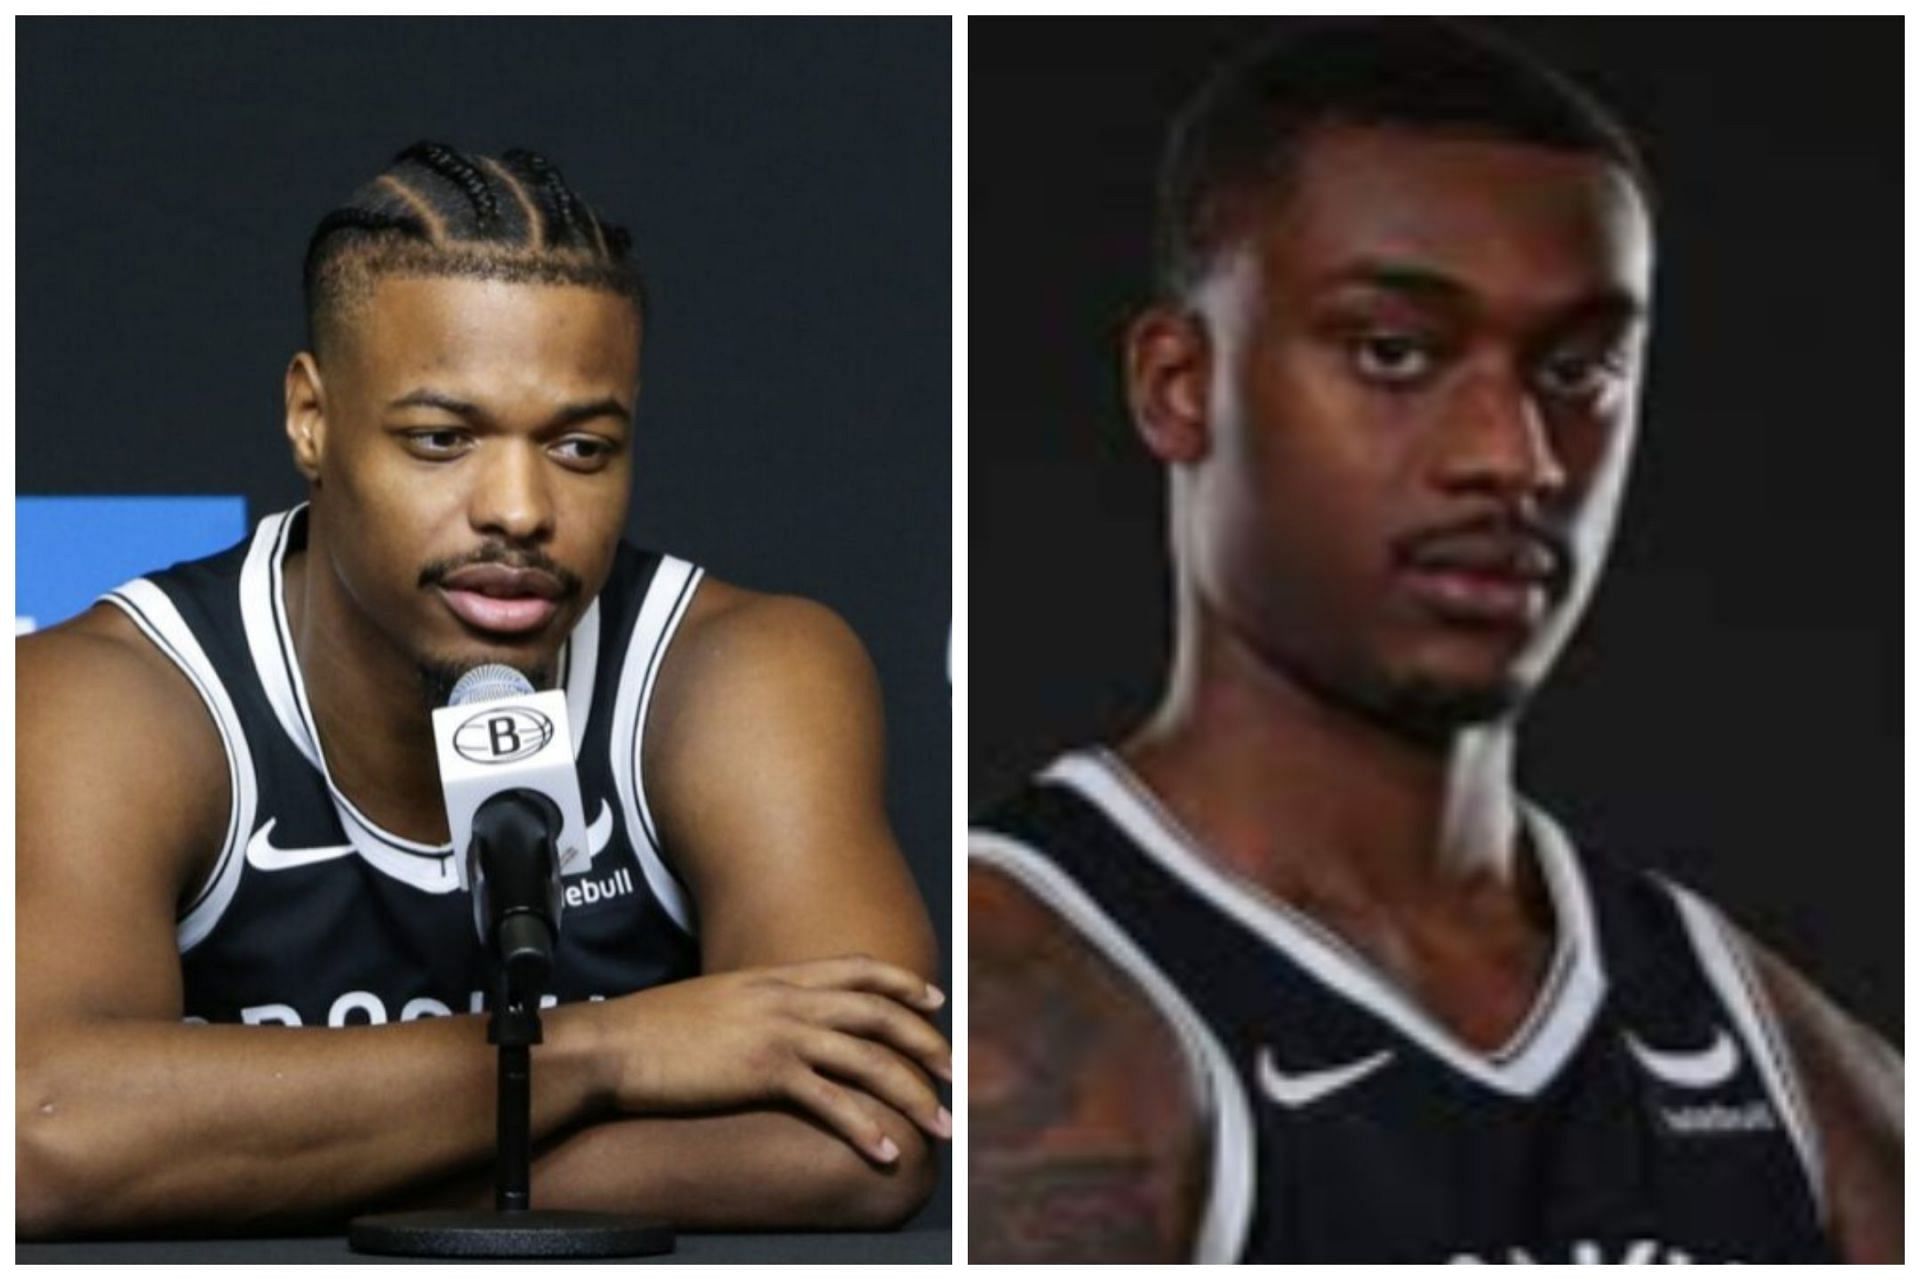 Dennis Smith Jr. (left) and Dariq Whitehead (right) are on the Brooklyn Nets